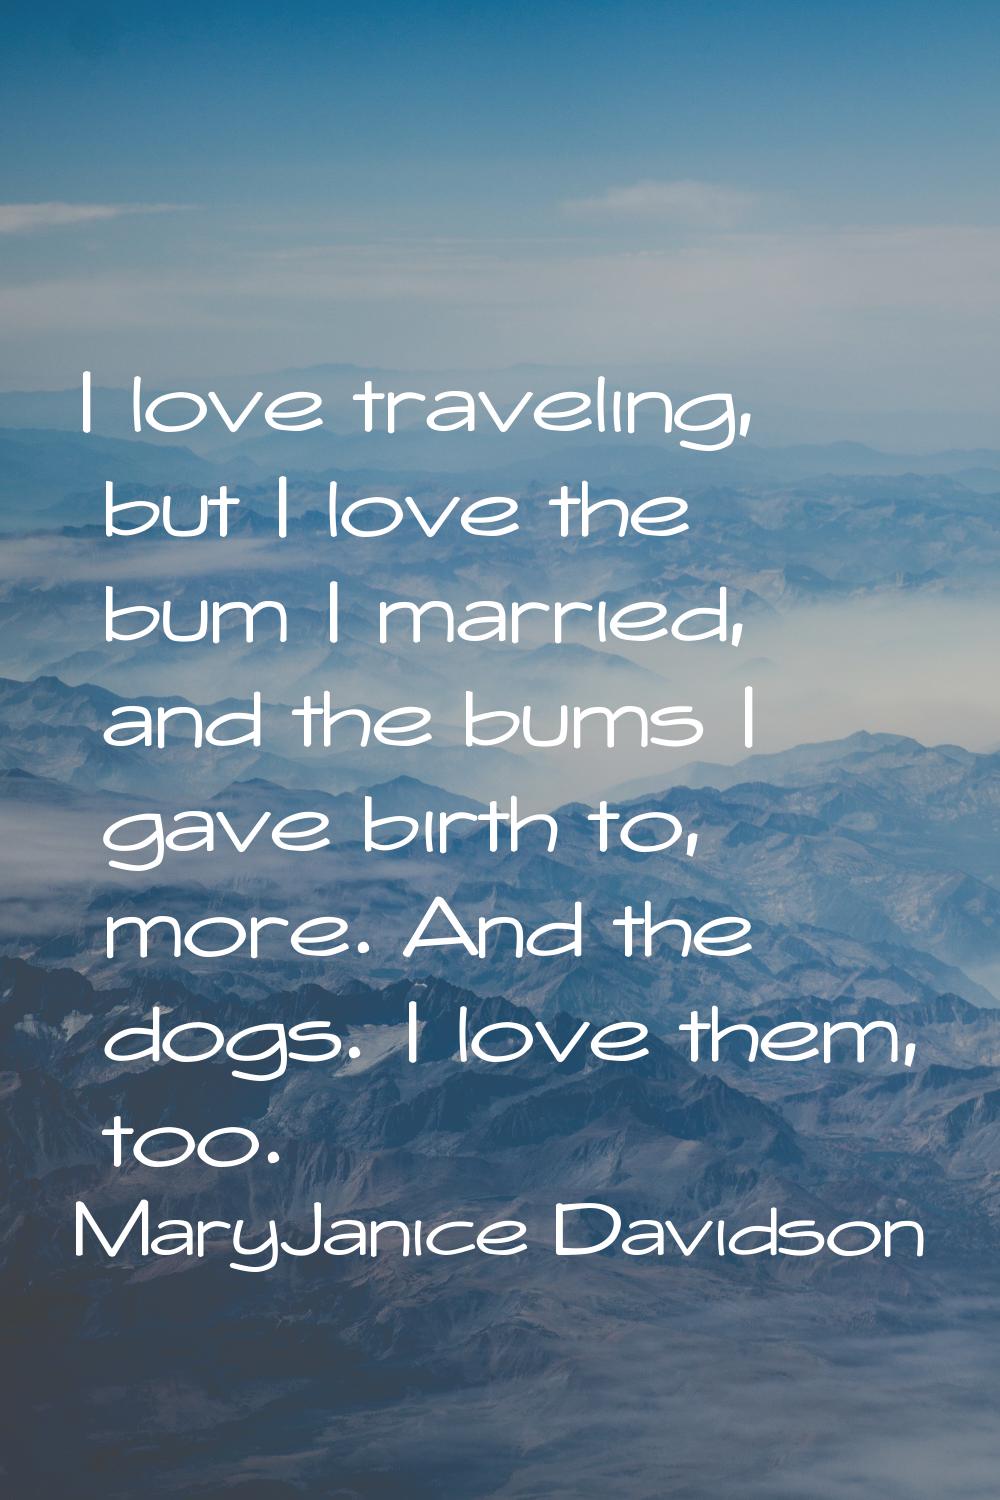 I love traveling, but I love the bum I married, and the bums I gave birth to, more. And the dogs. I